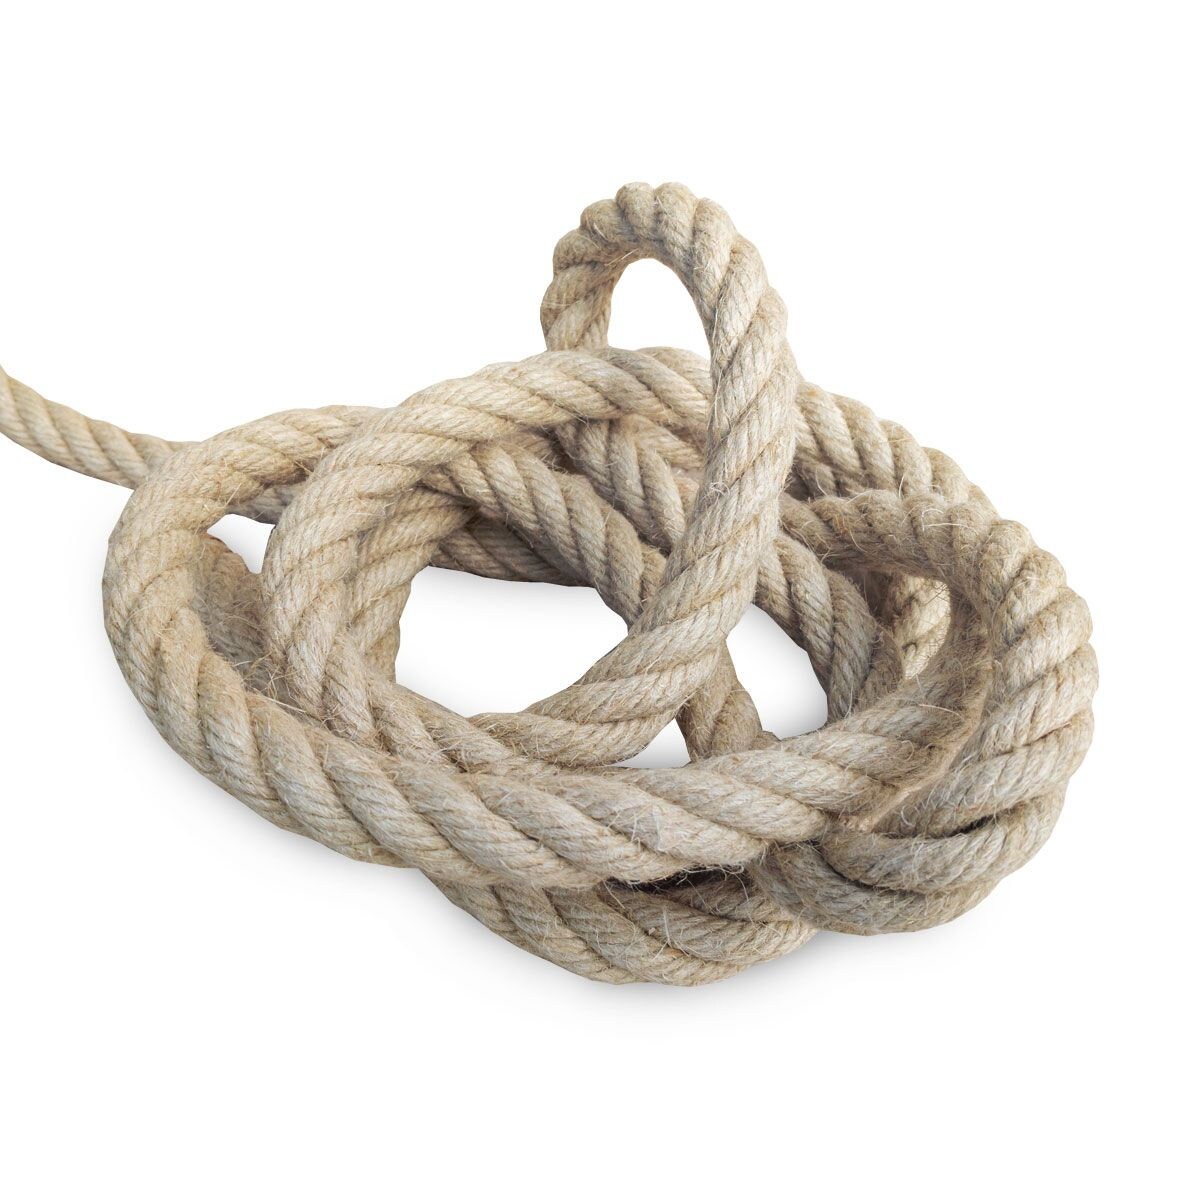 for boats or decoration 18mm Synthetic Hemp Rope traditional nautical look 